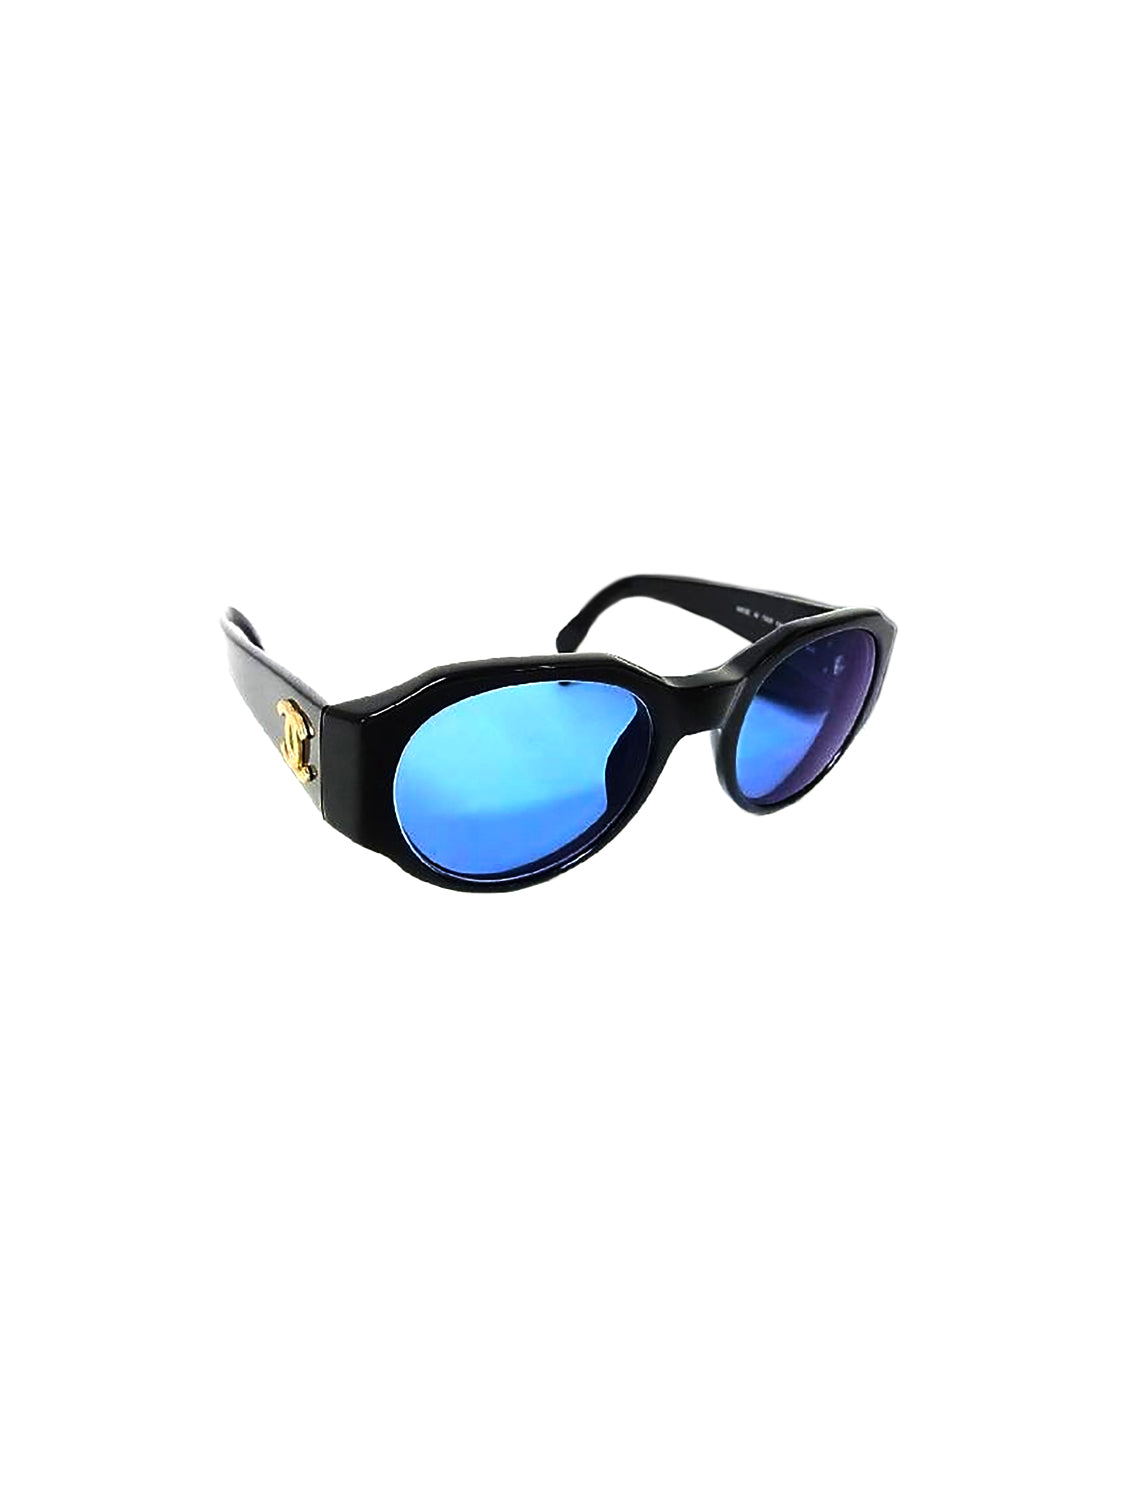 Mens Polarized Rimless Rimless Sunglasses Mens With Gold Metal Brand And  Designer Fashion Wholesale Price, Red, Black, And Blue Lens, Includes Box  From Paizhao, $17.12 | DHgate.Com